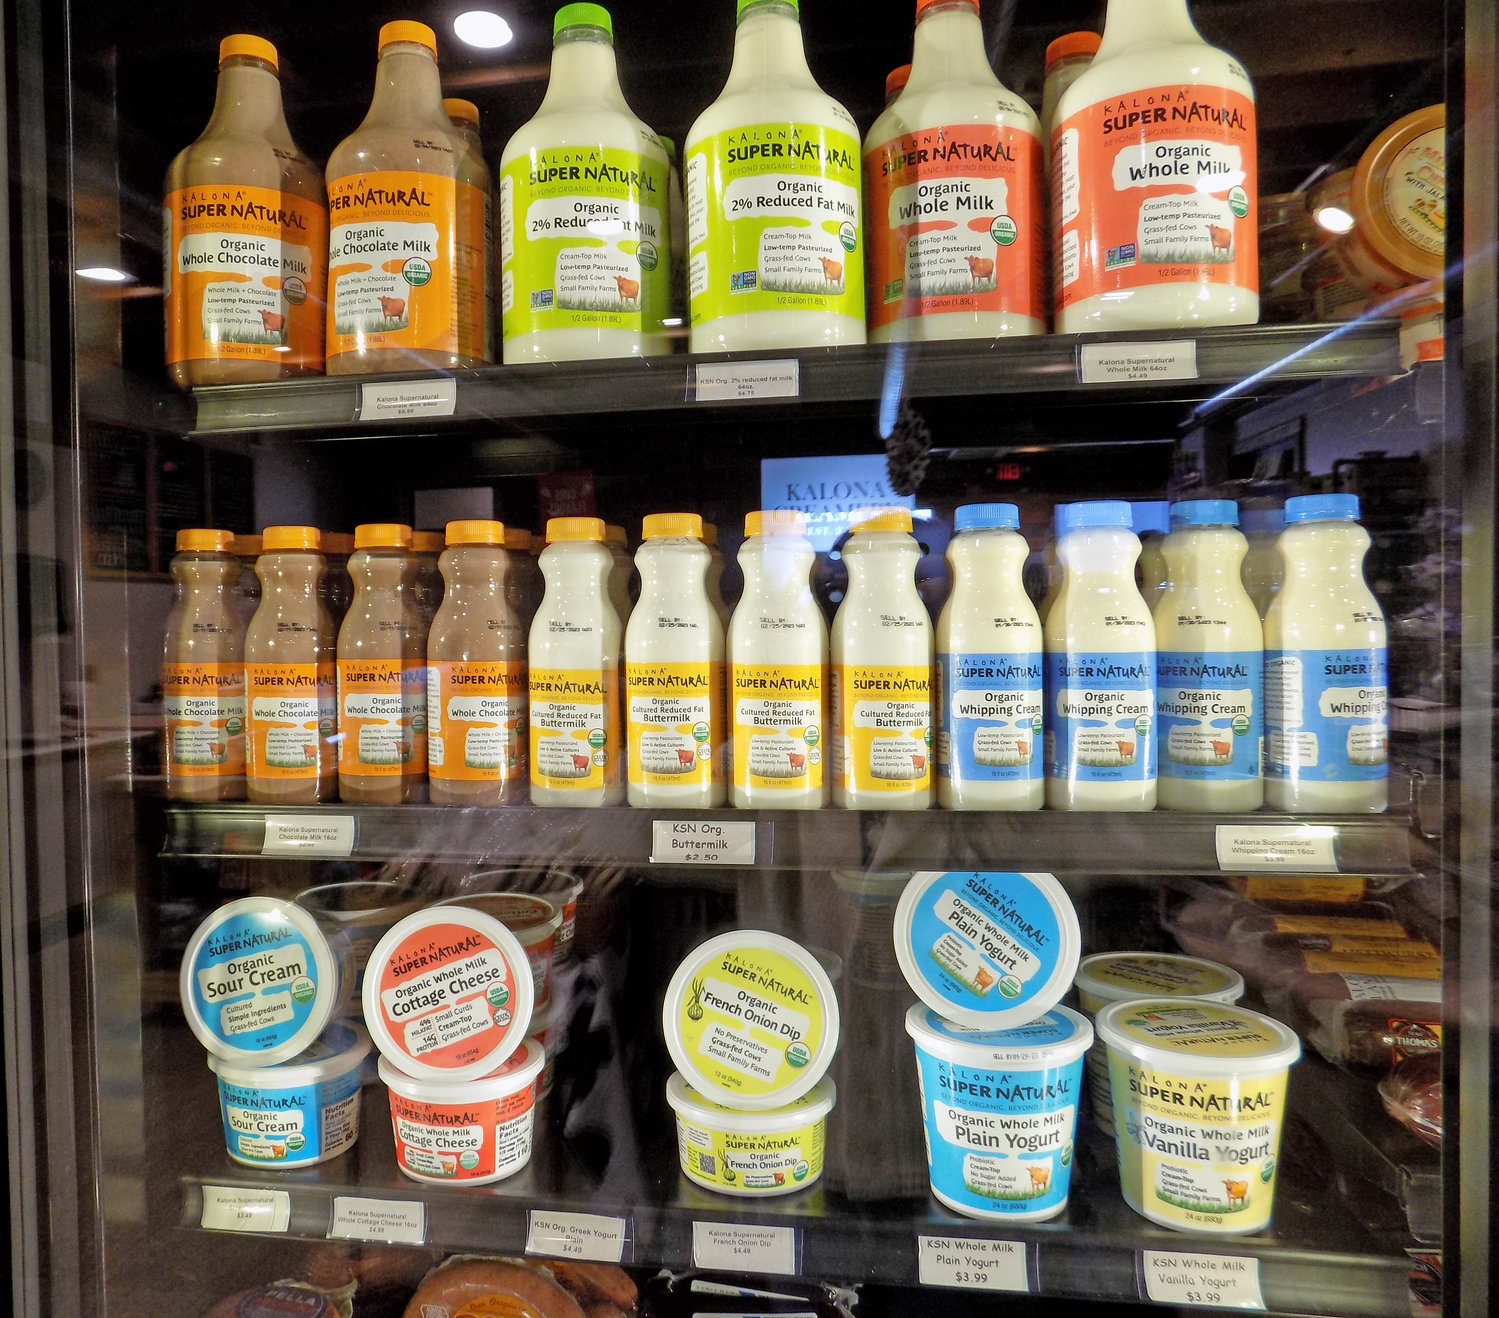 The full range of Kalona SuperNatural products can be purchased at Kalona Creamery (formerly the Cheese Factory) at 2206 540th St SW, Kalona.  Hours are Monday – Saturday, 9 a.m. to 5 p.m.